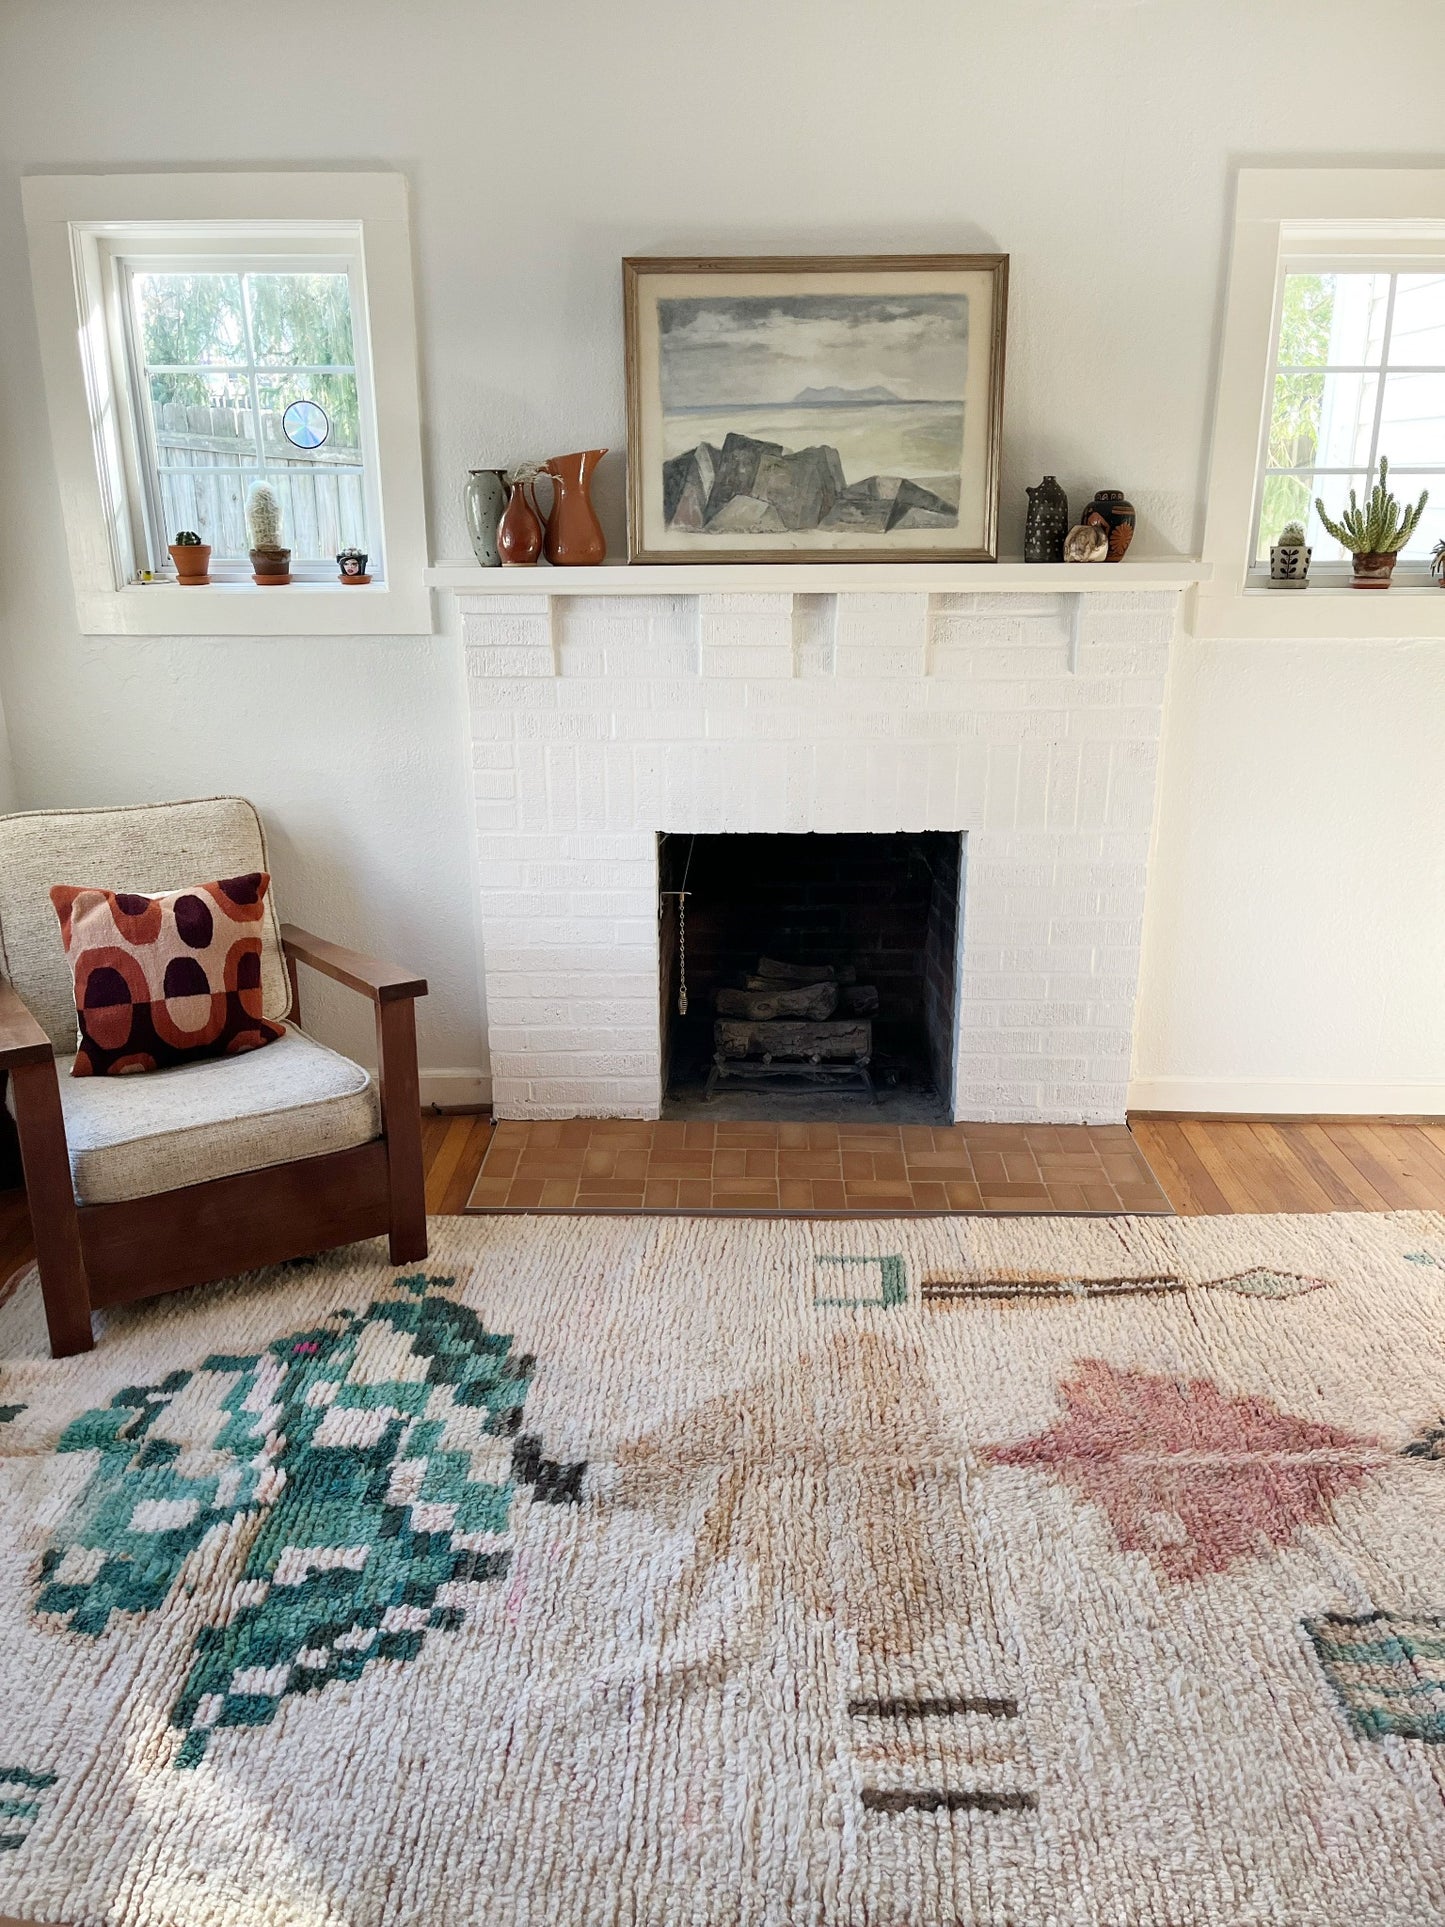 Style Maya Moroccan Rug by a FIreplace